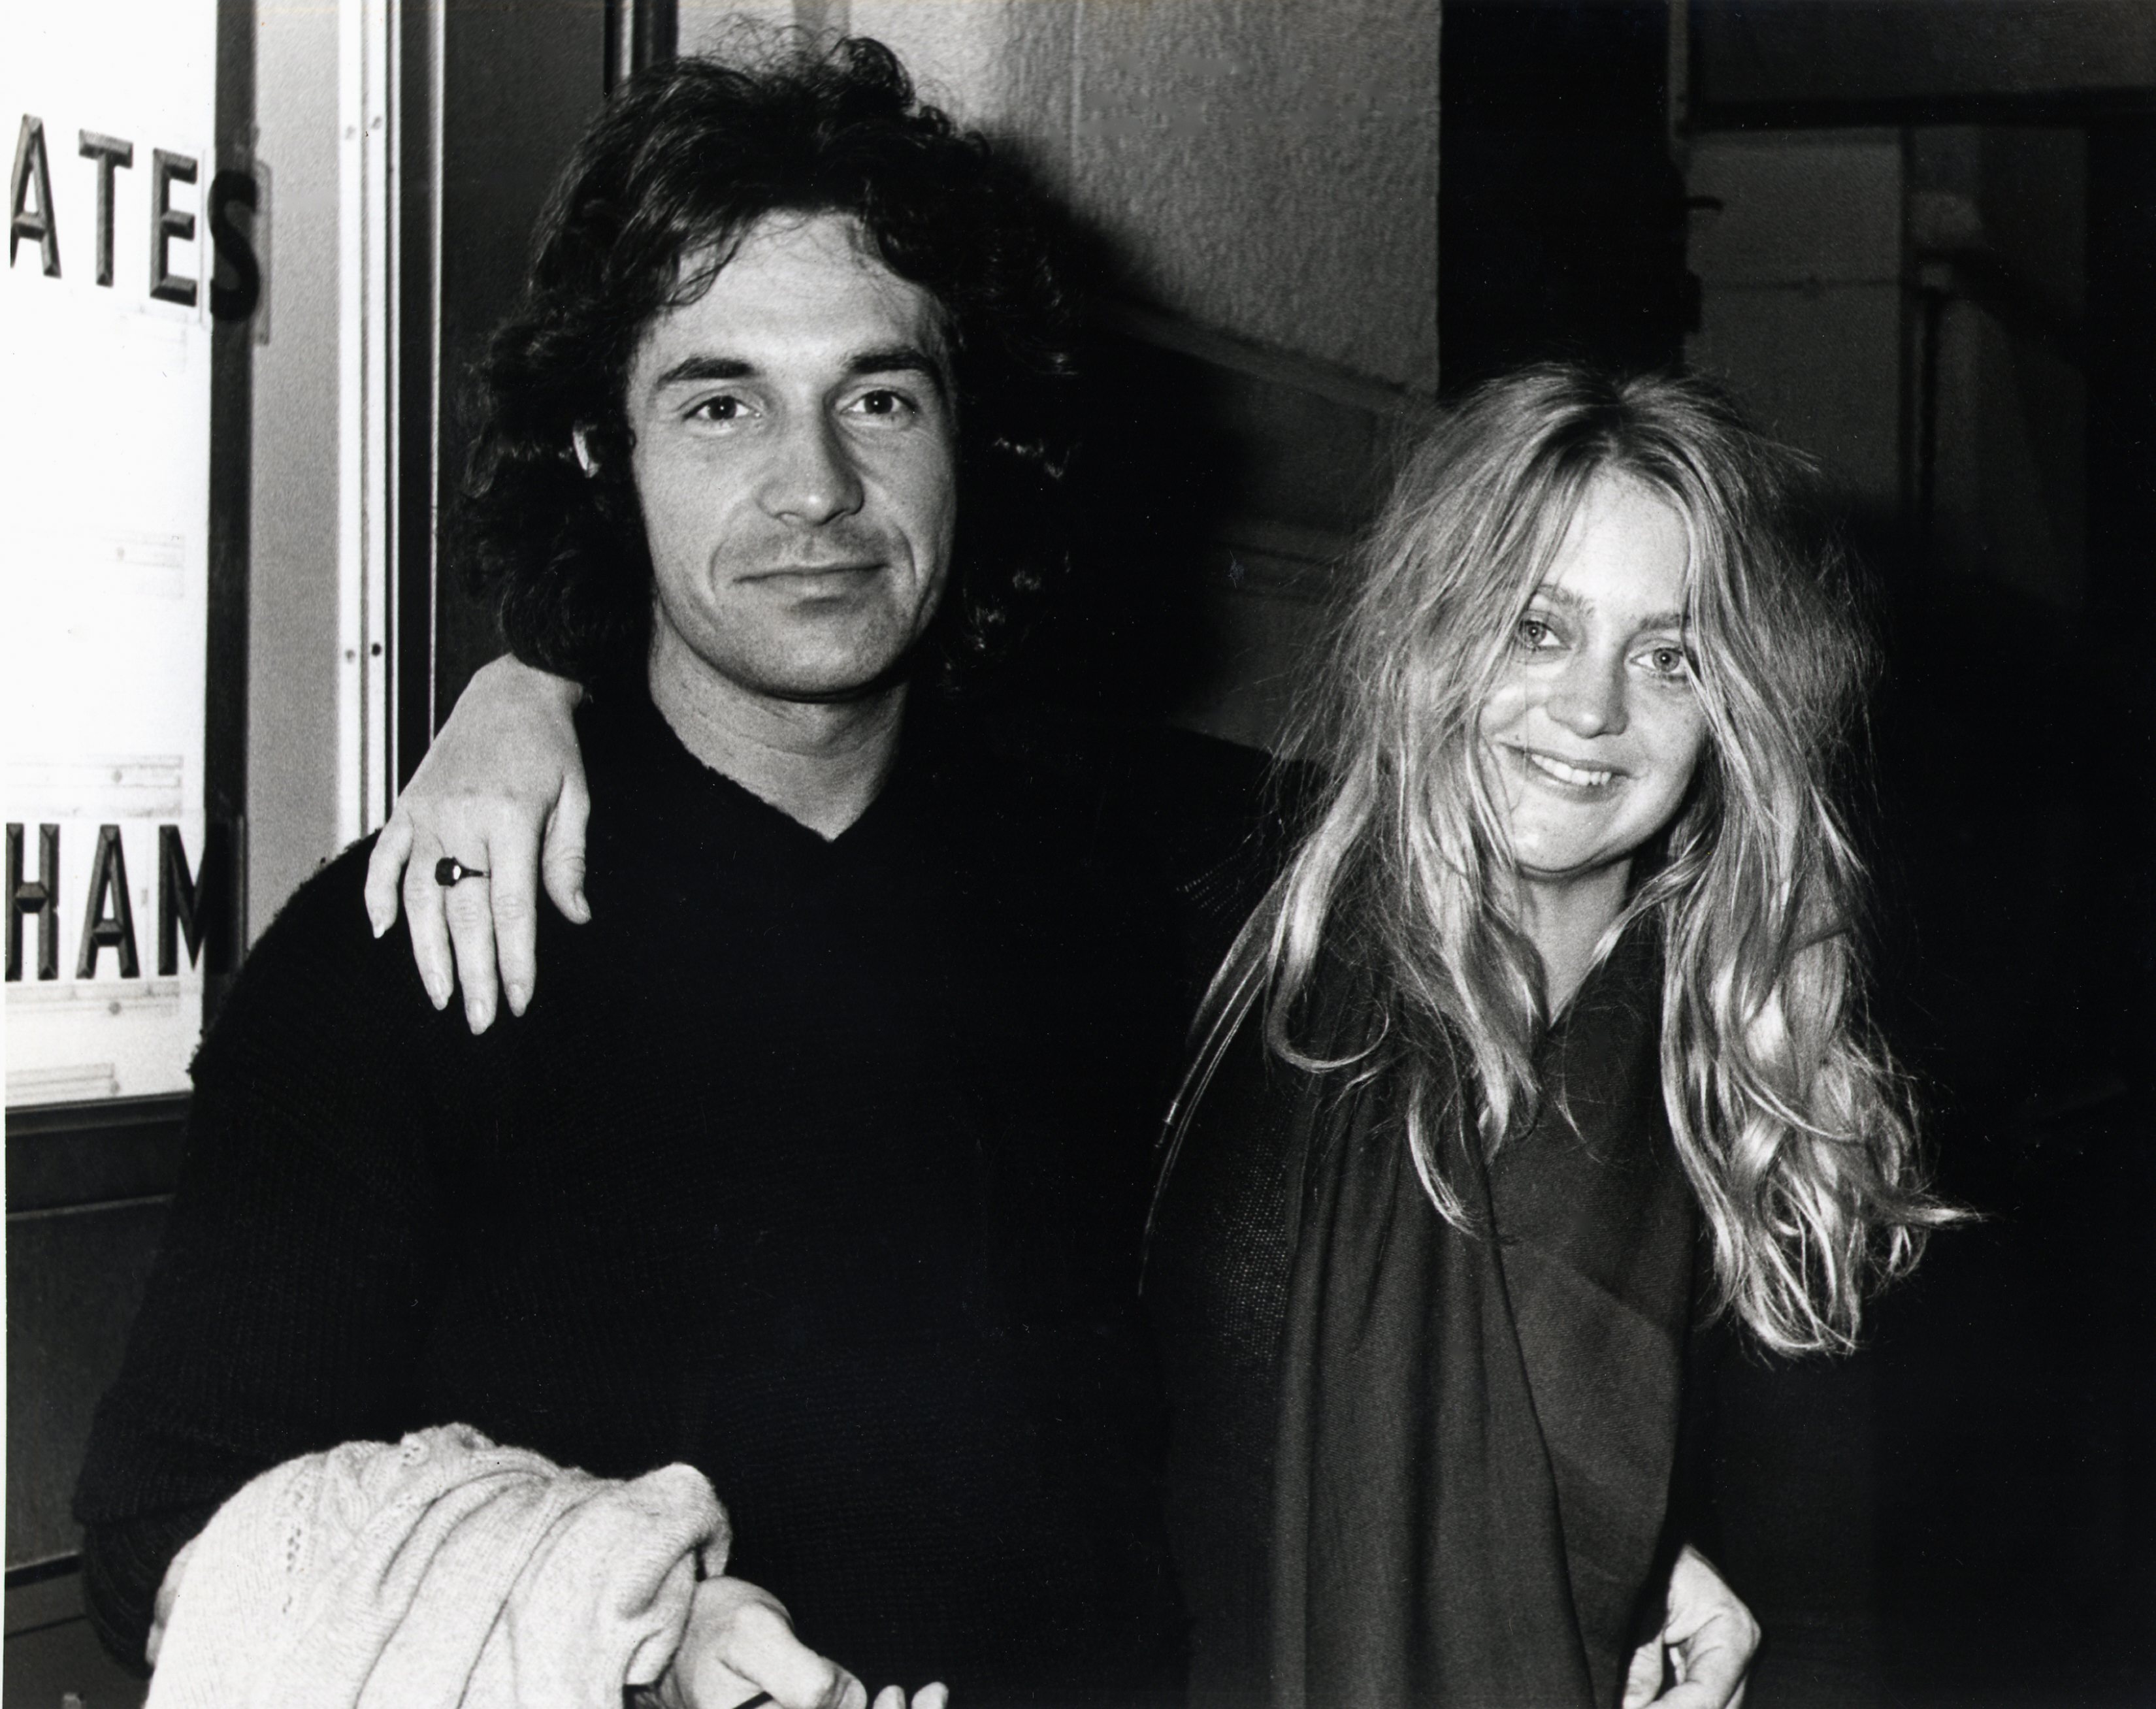 Bill Hudson and Goldie Hawn pose for a picture together in 1976 | Source: Getty Images